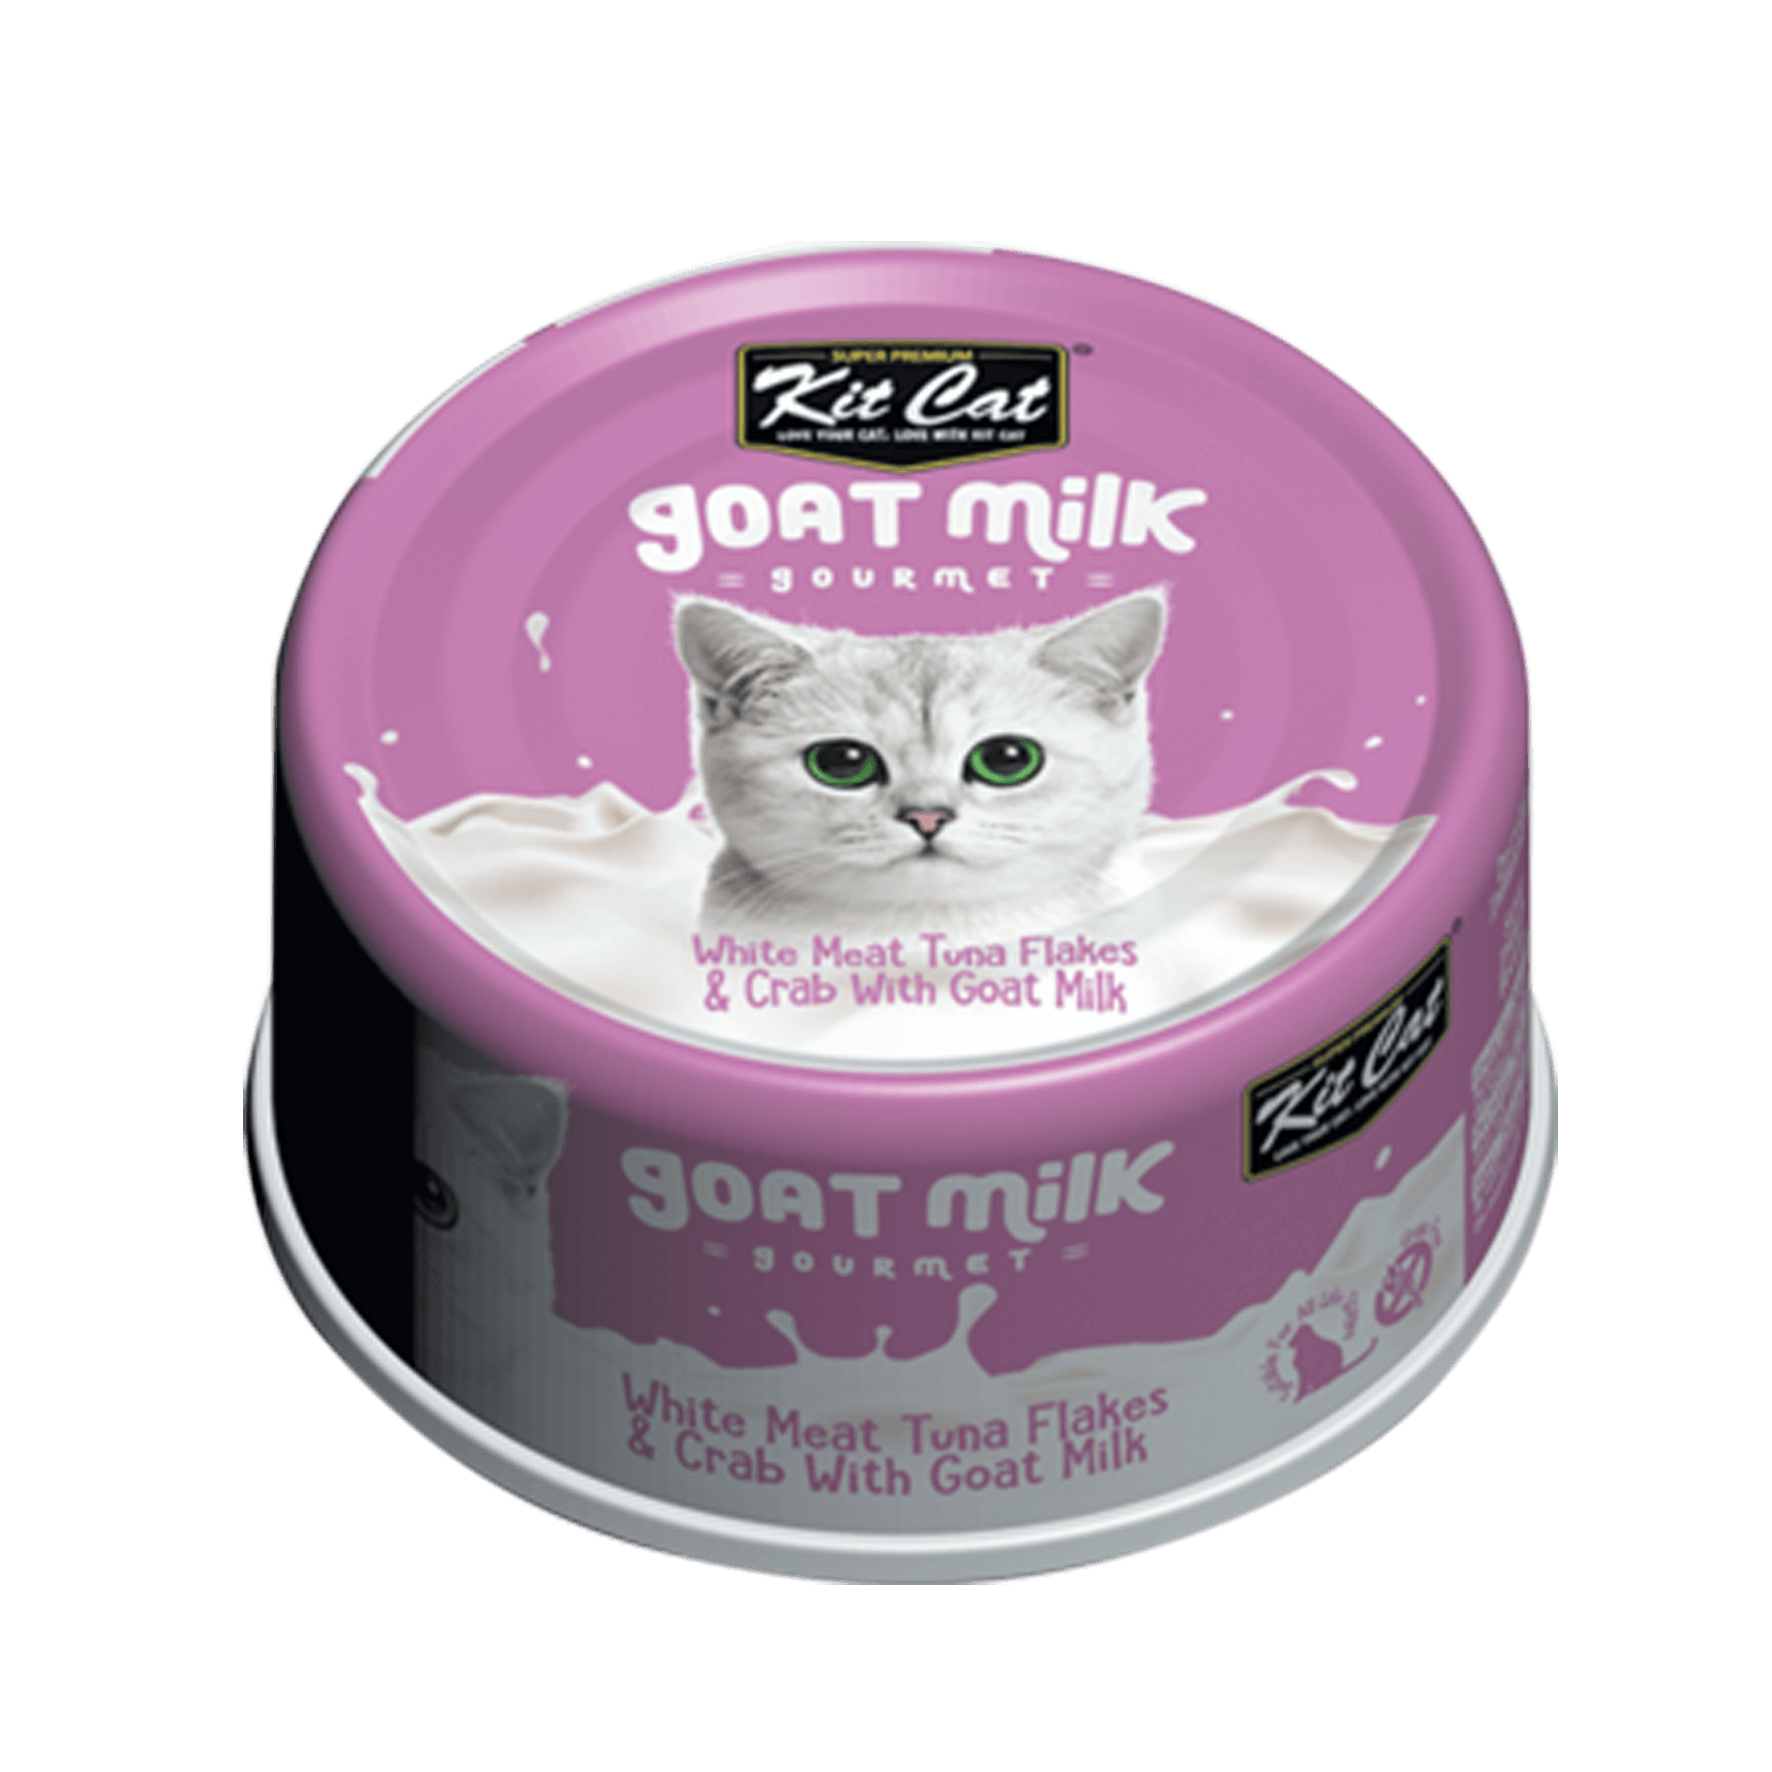 Kit Cat White Meat Tuna Flakes & Crab With Goat Milk (Wet Cat Food)